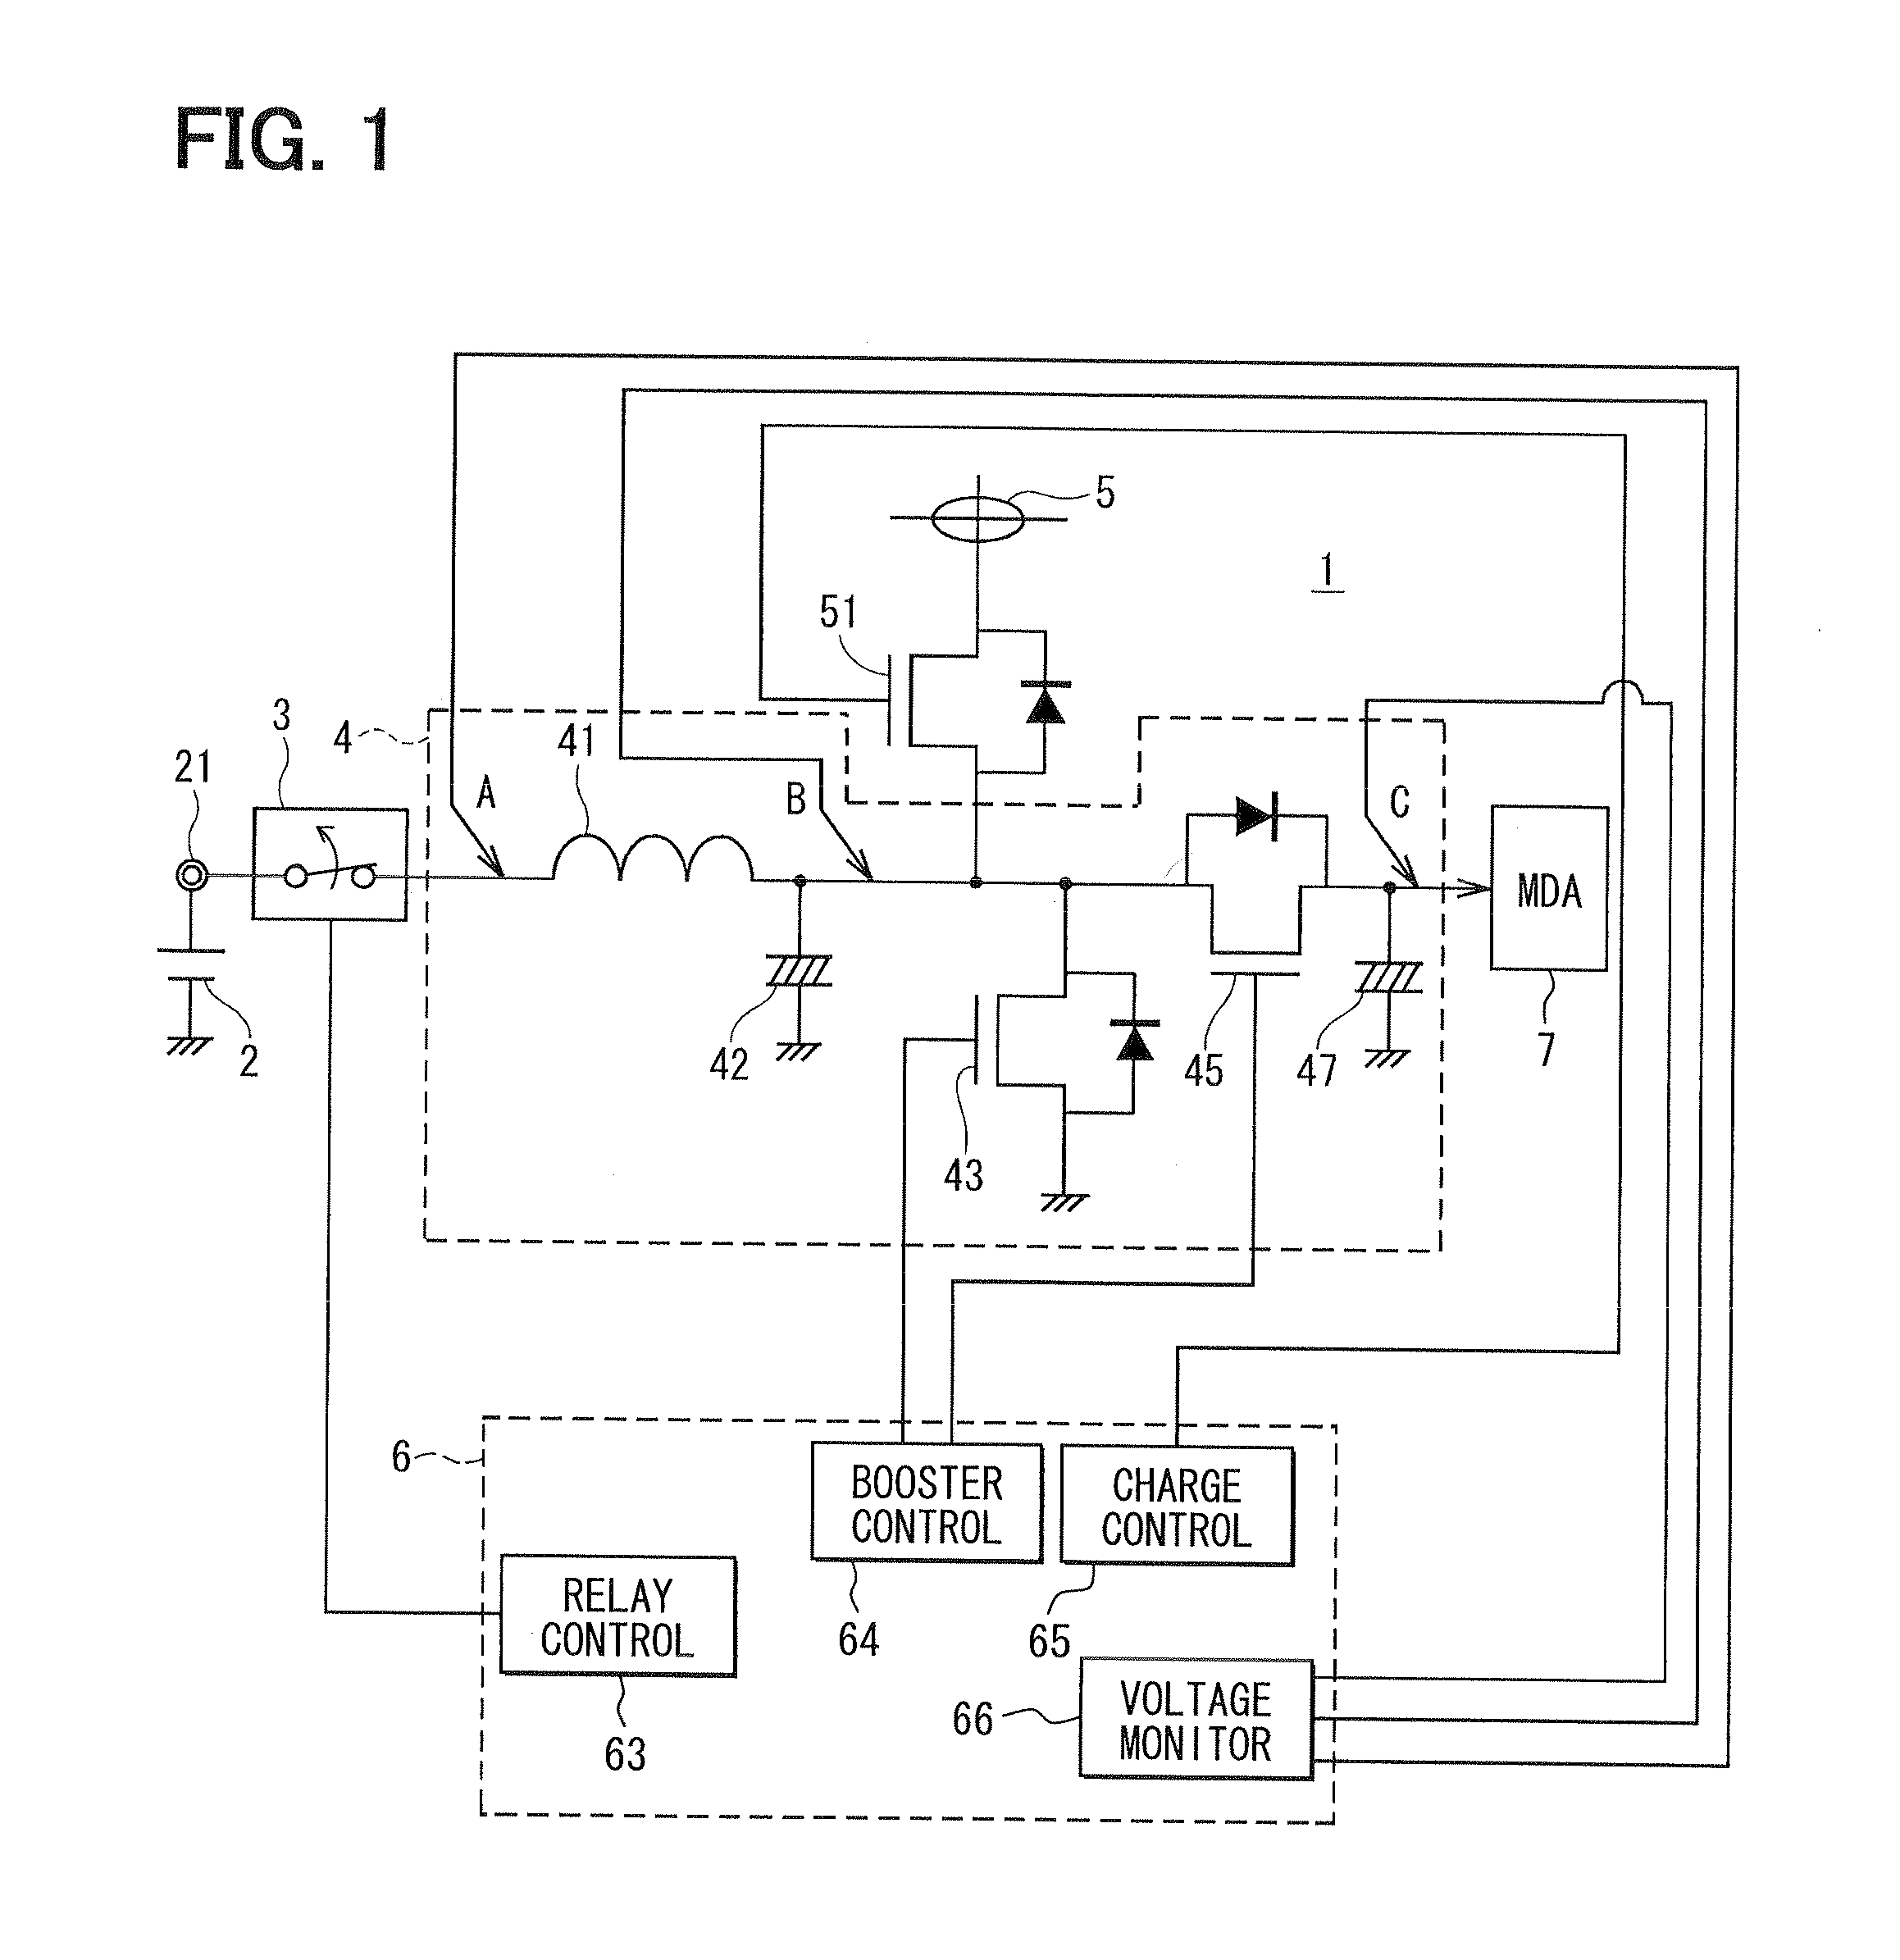 Voltage booster apparatus for power steering system